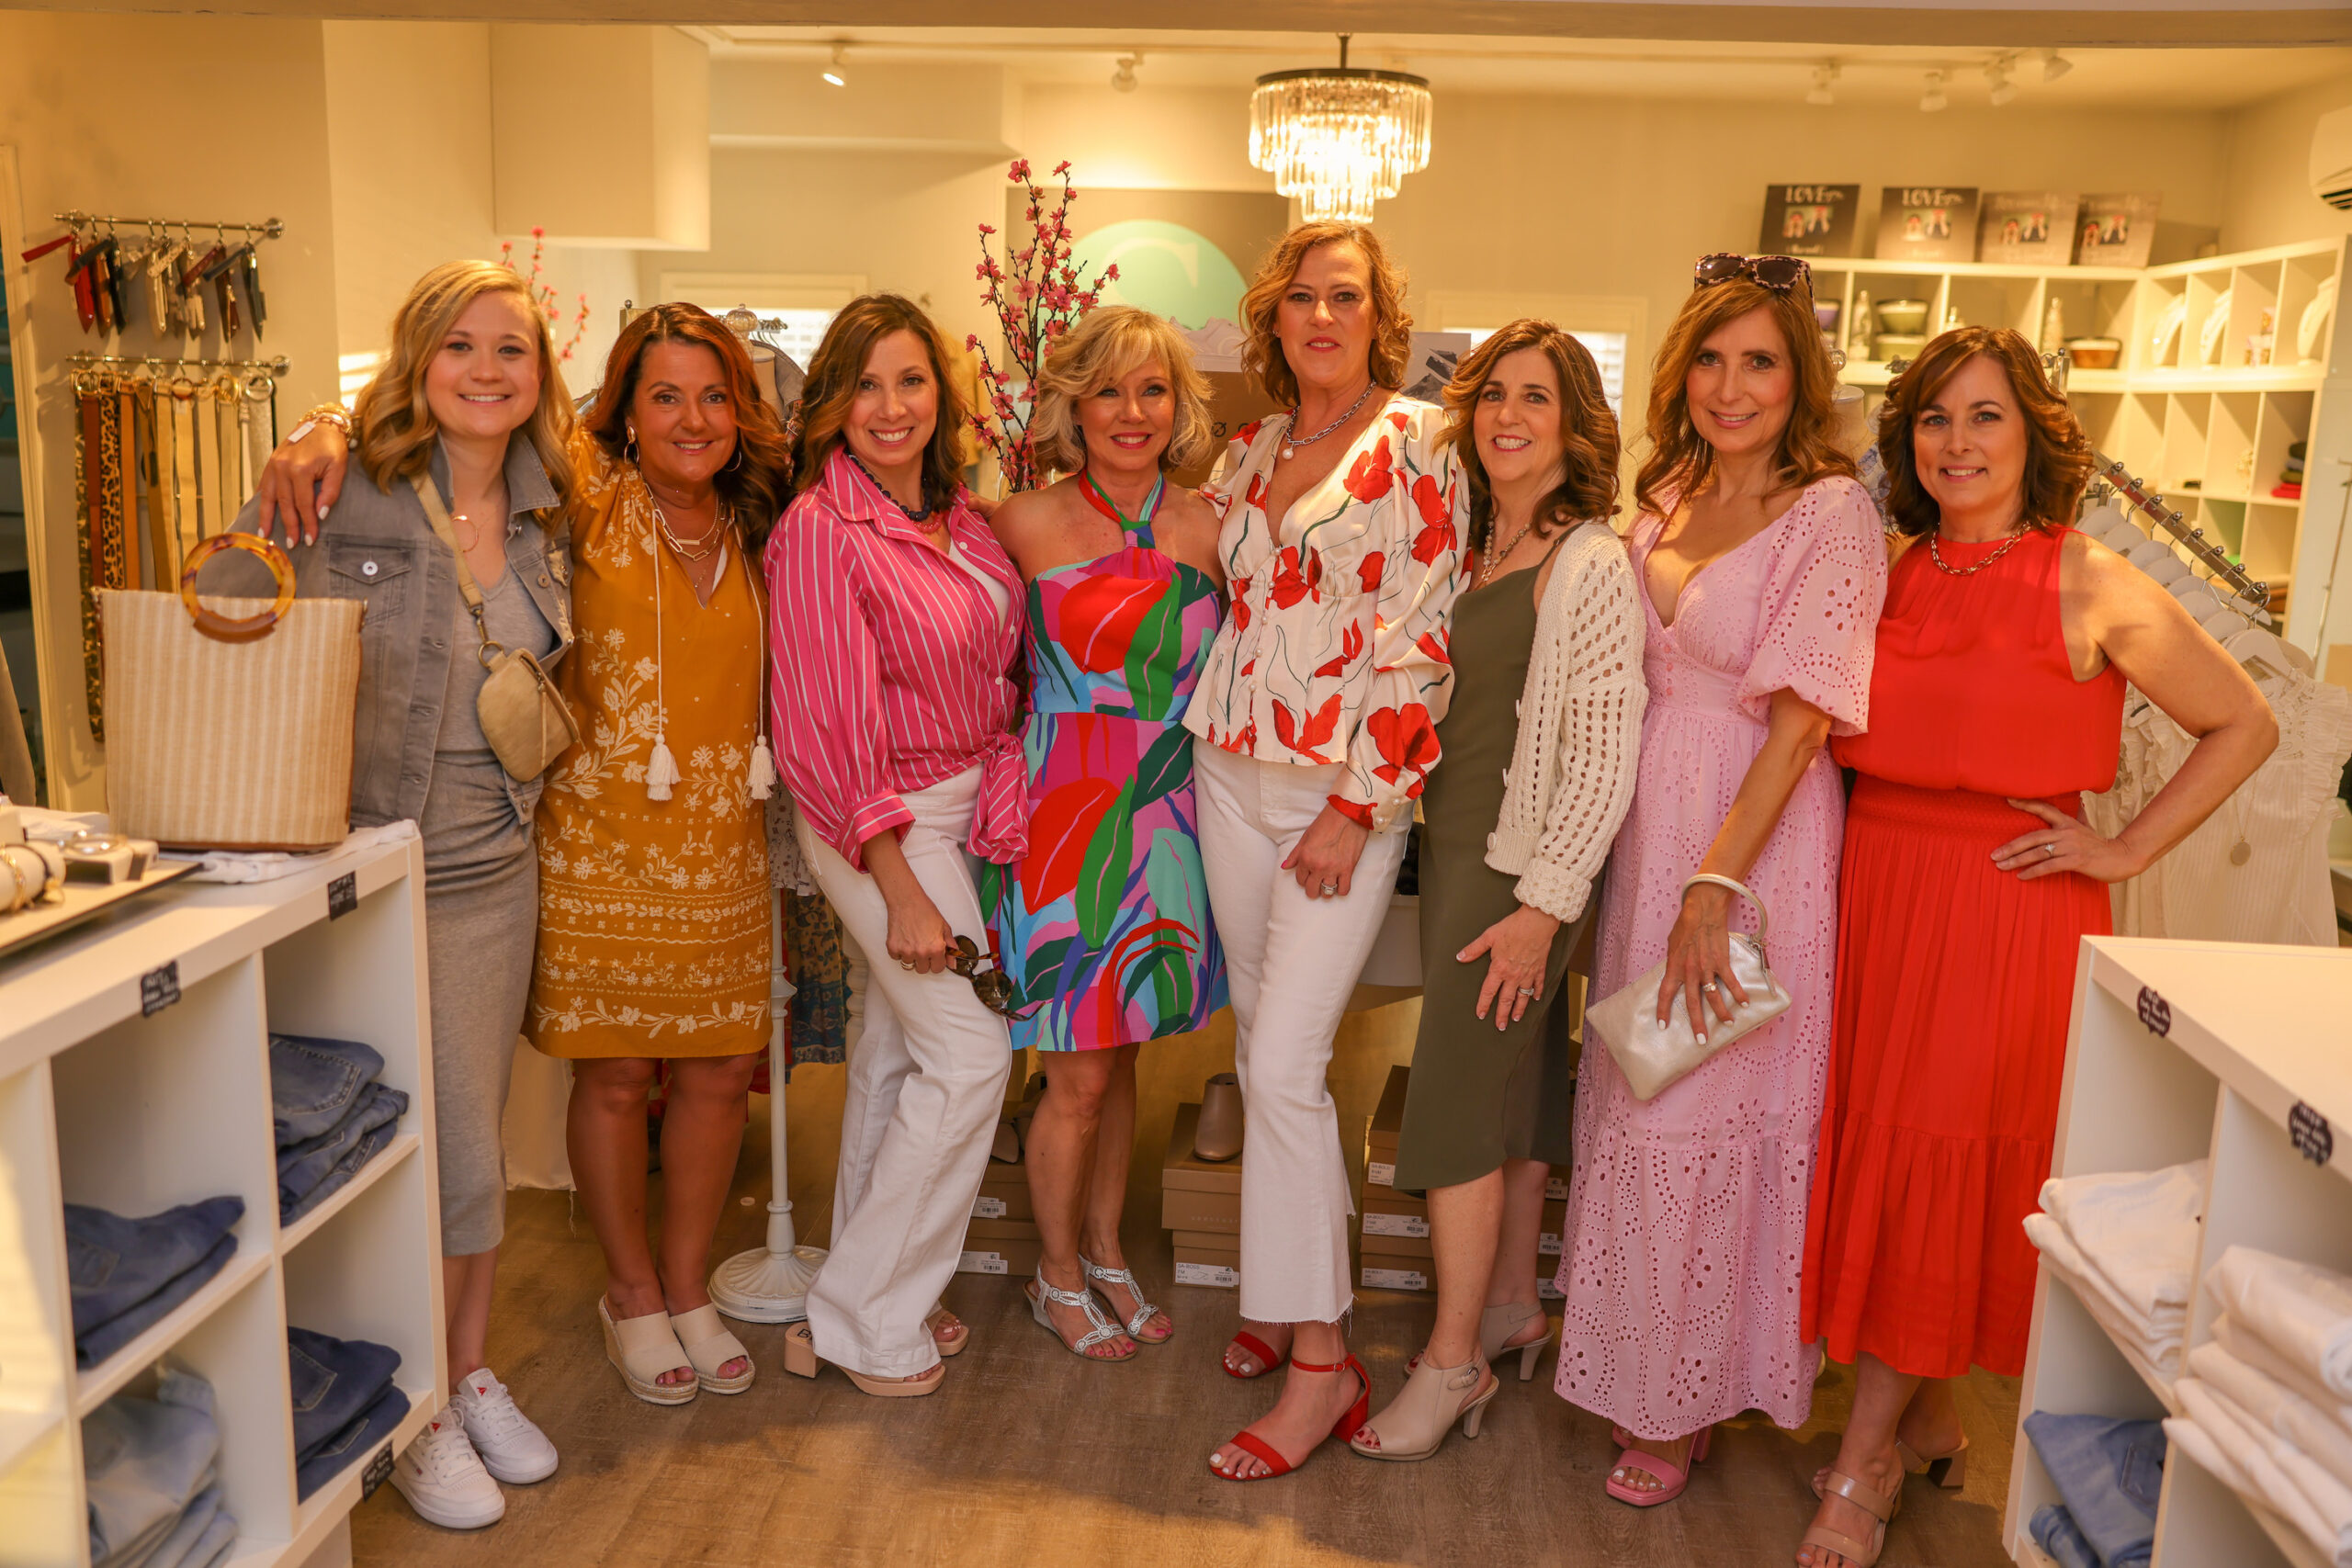 Photos: Swoon Spring Fashion Show fundraiser for ovarian cancer research